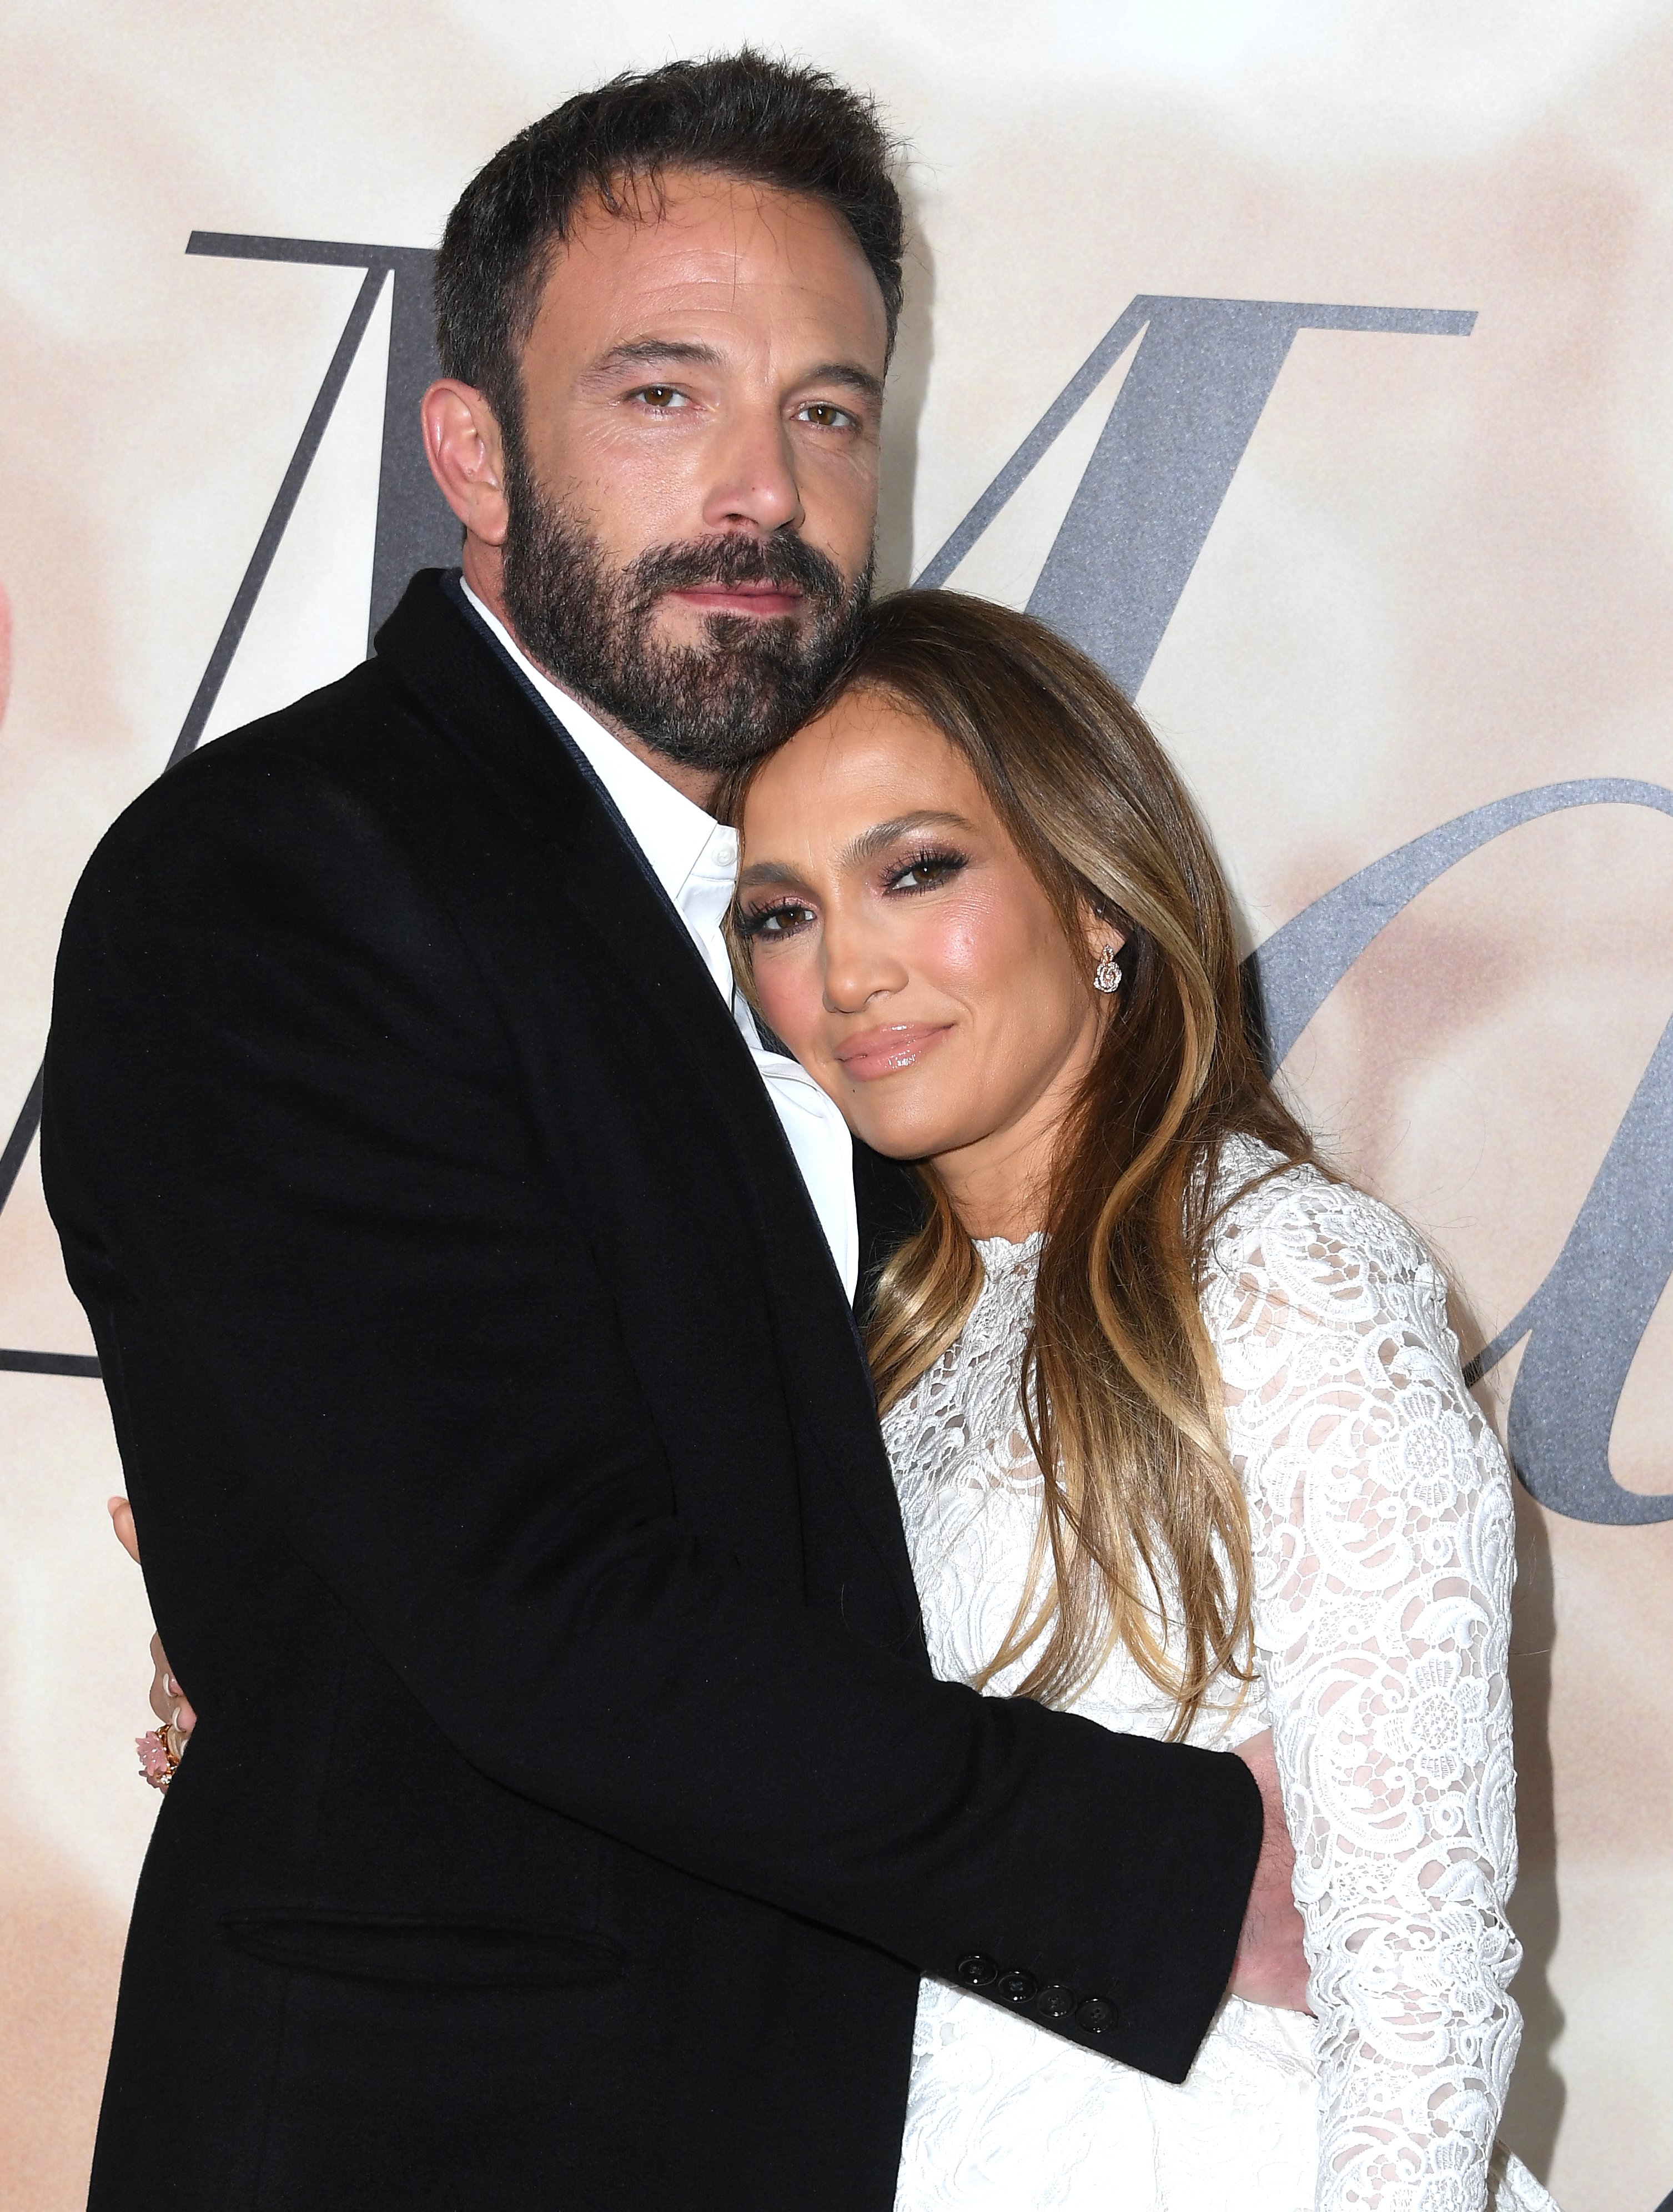 Ben Affleck and Jennifer Lopez arrive at the Los Angeles Special Screening Of "Marry Me" on February 08, 2022, in Los Angeles, California. | Source: Getty Images